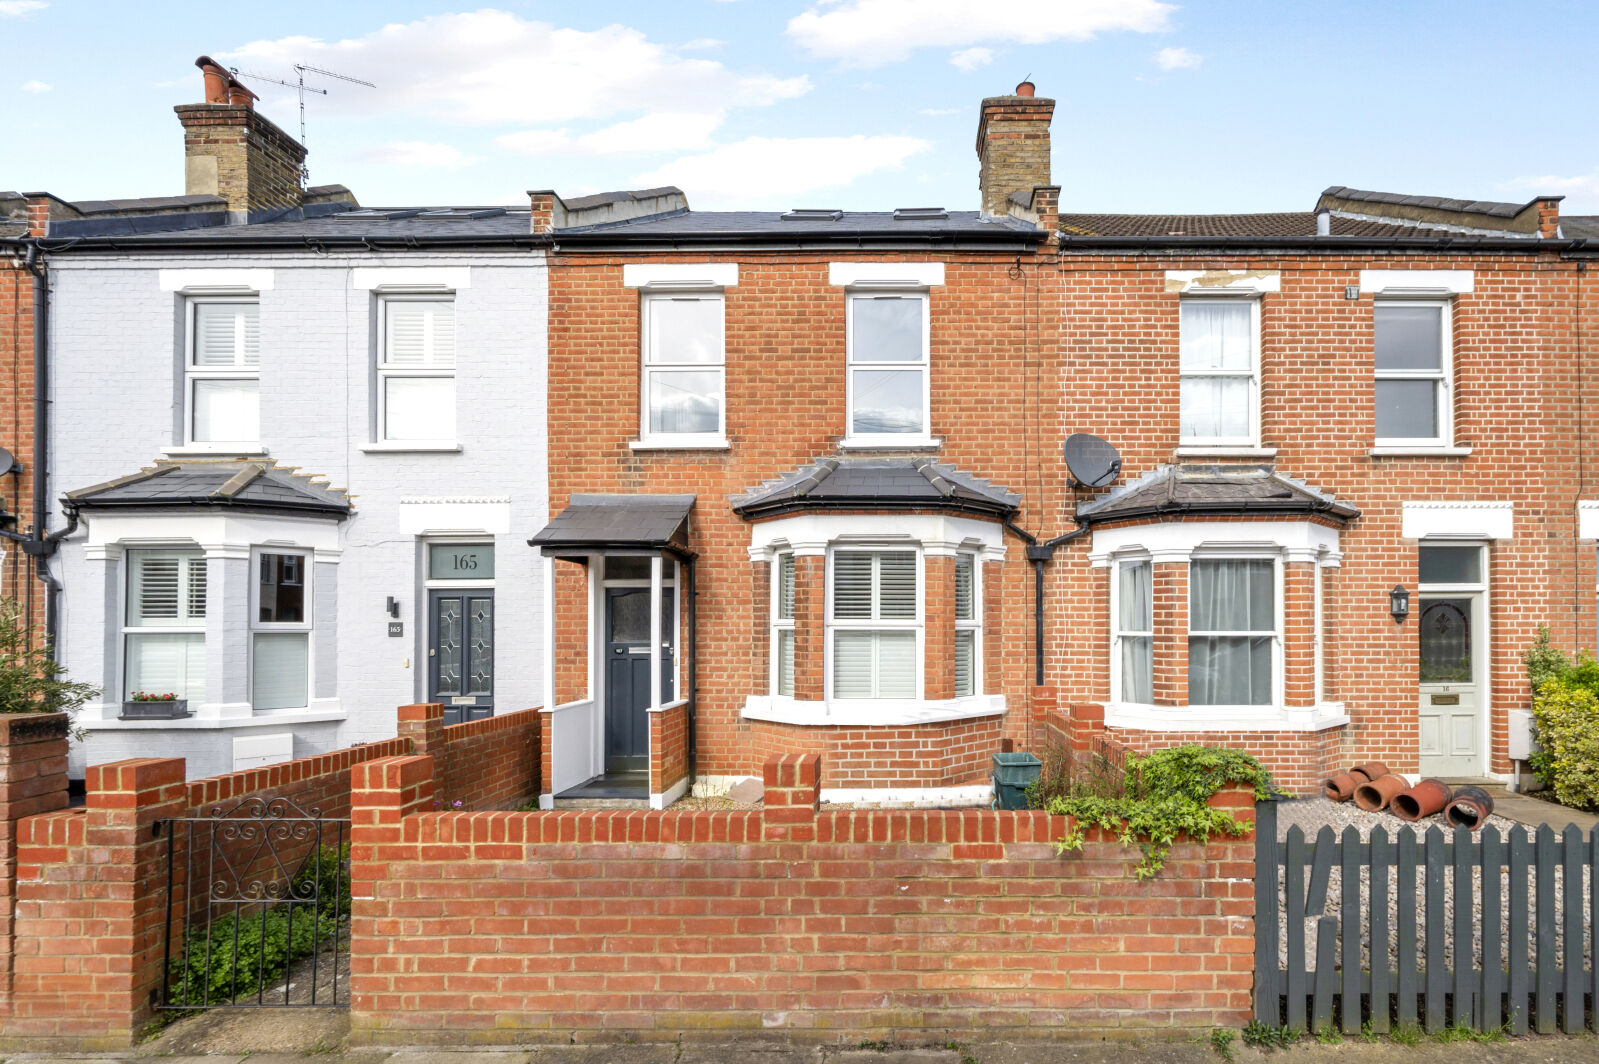 3 bedroom mid terraced house for sale Thornhill Road, Surbiton, KT6, main image